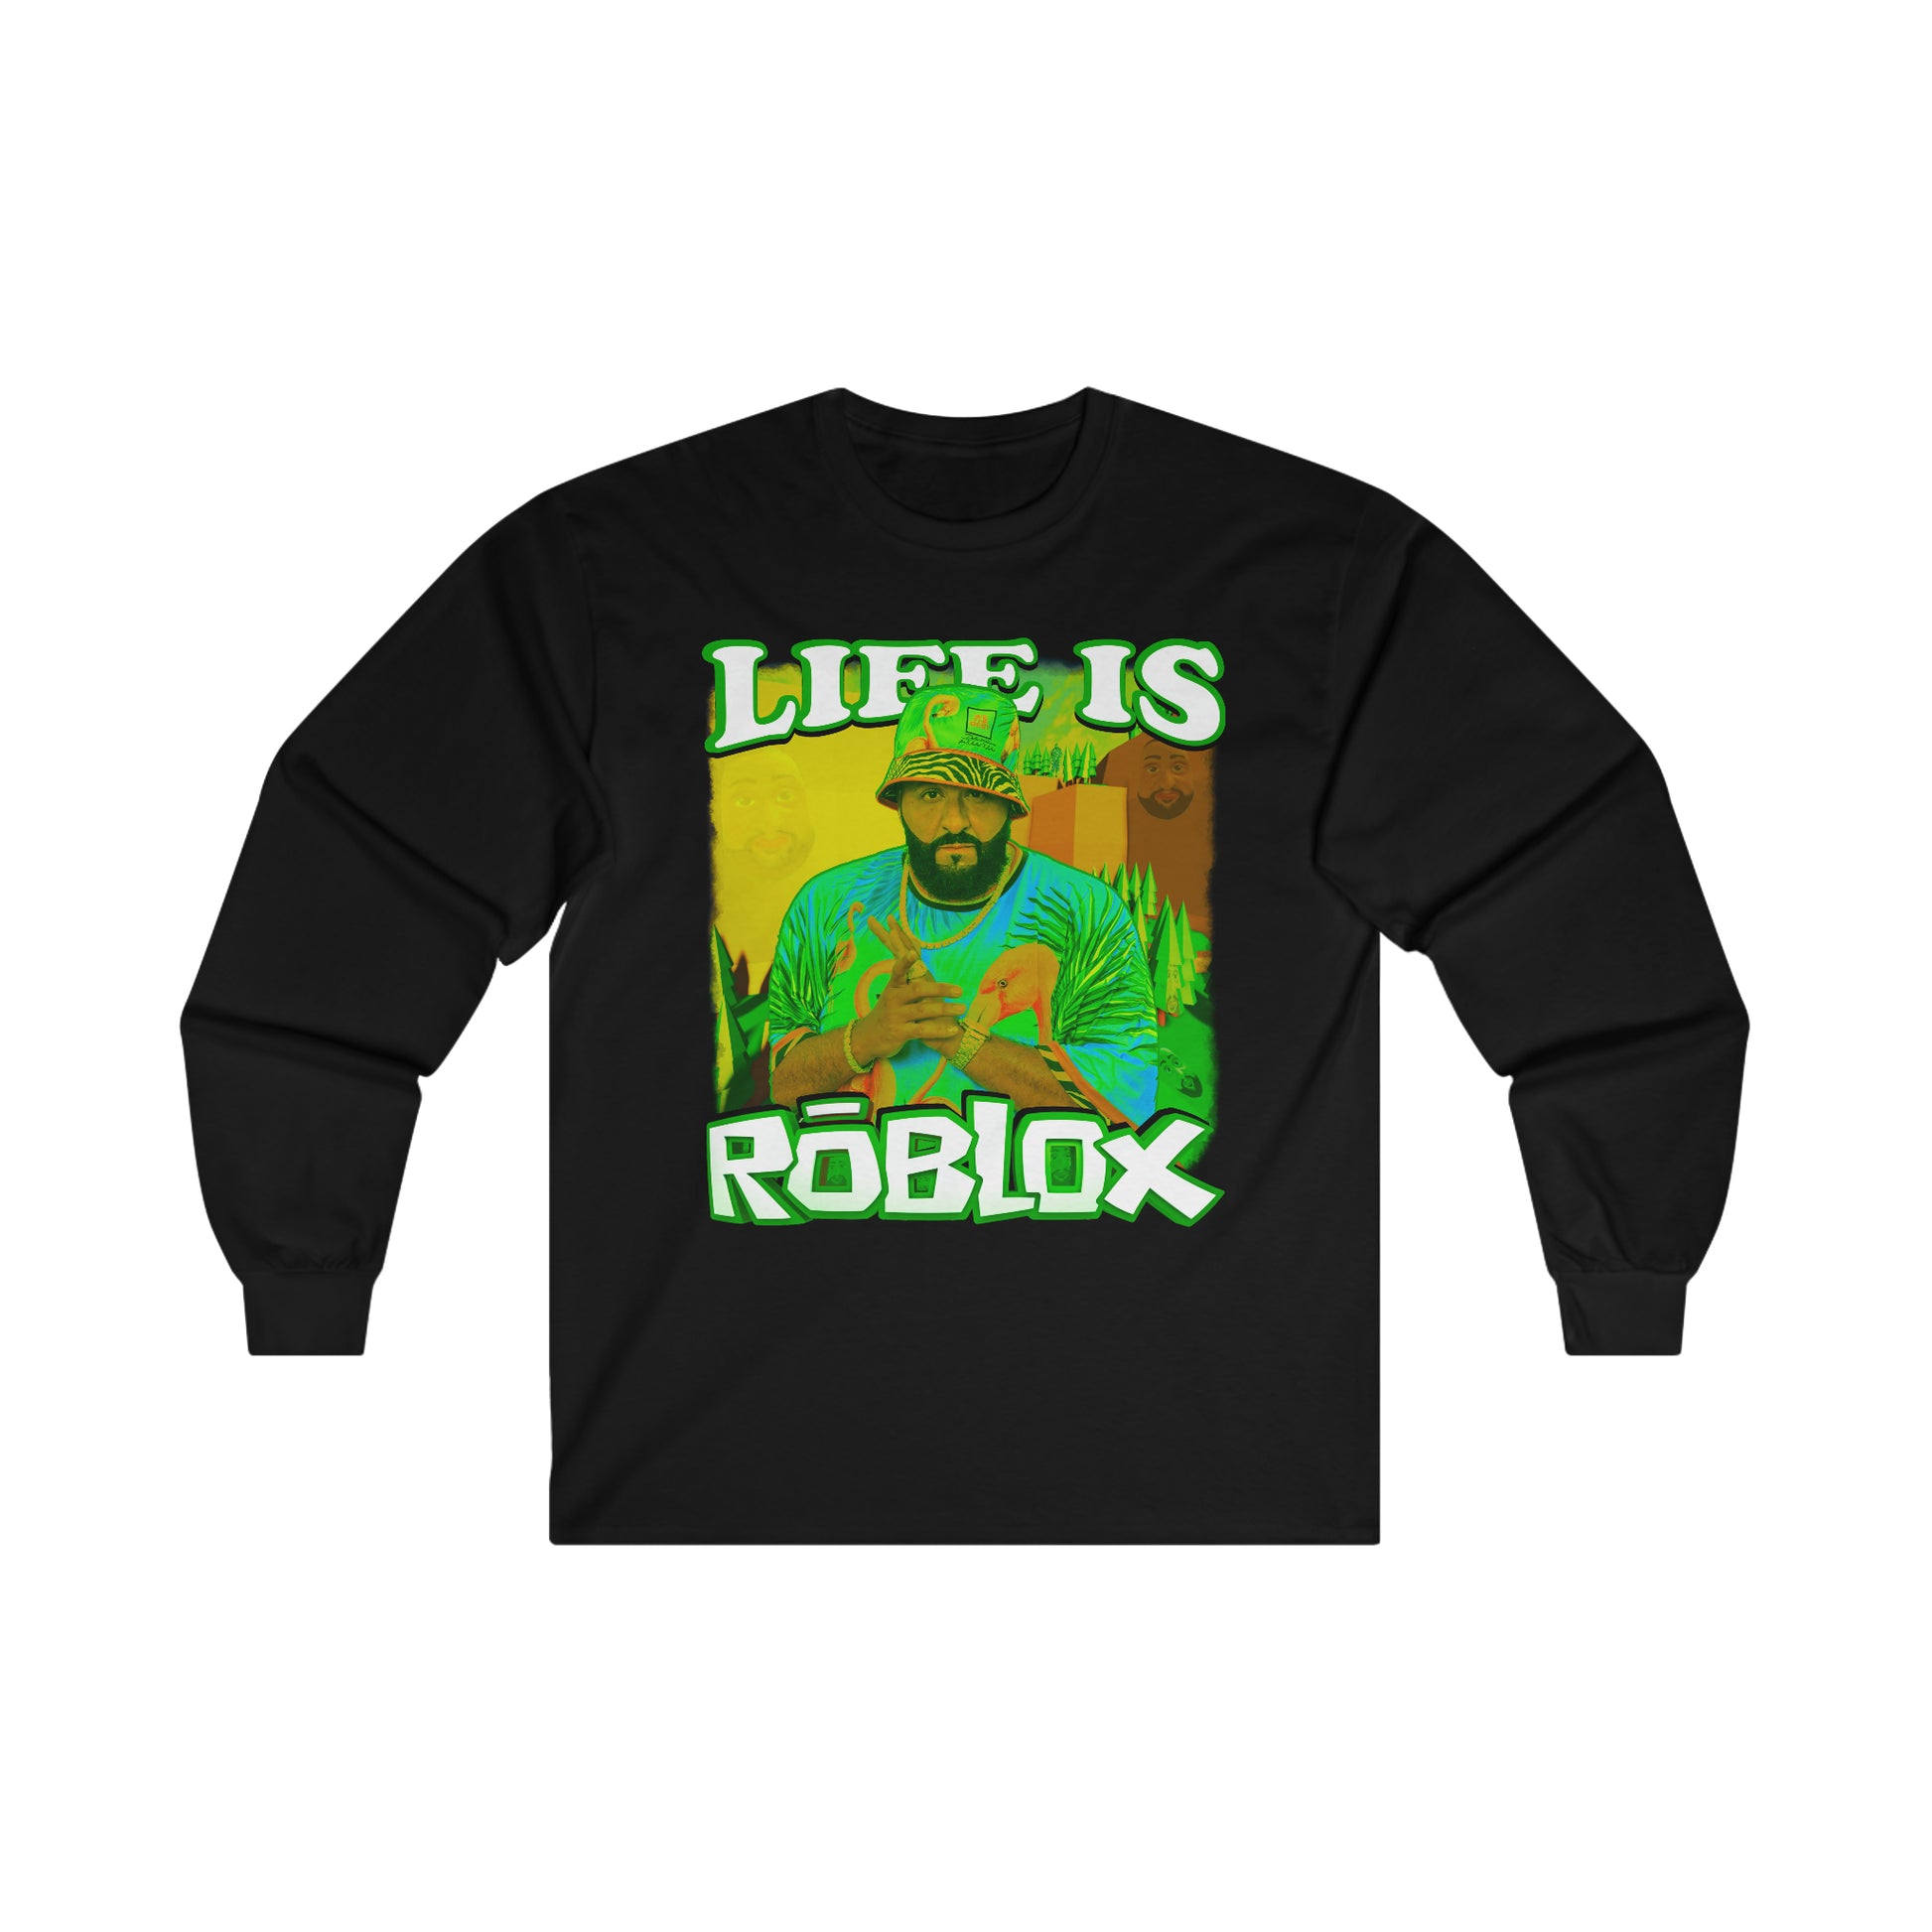 roblox uploaded a very interesting t shirt today : r/roblox